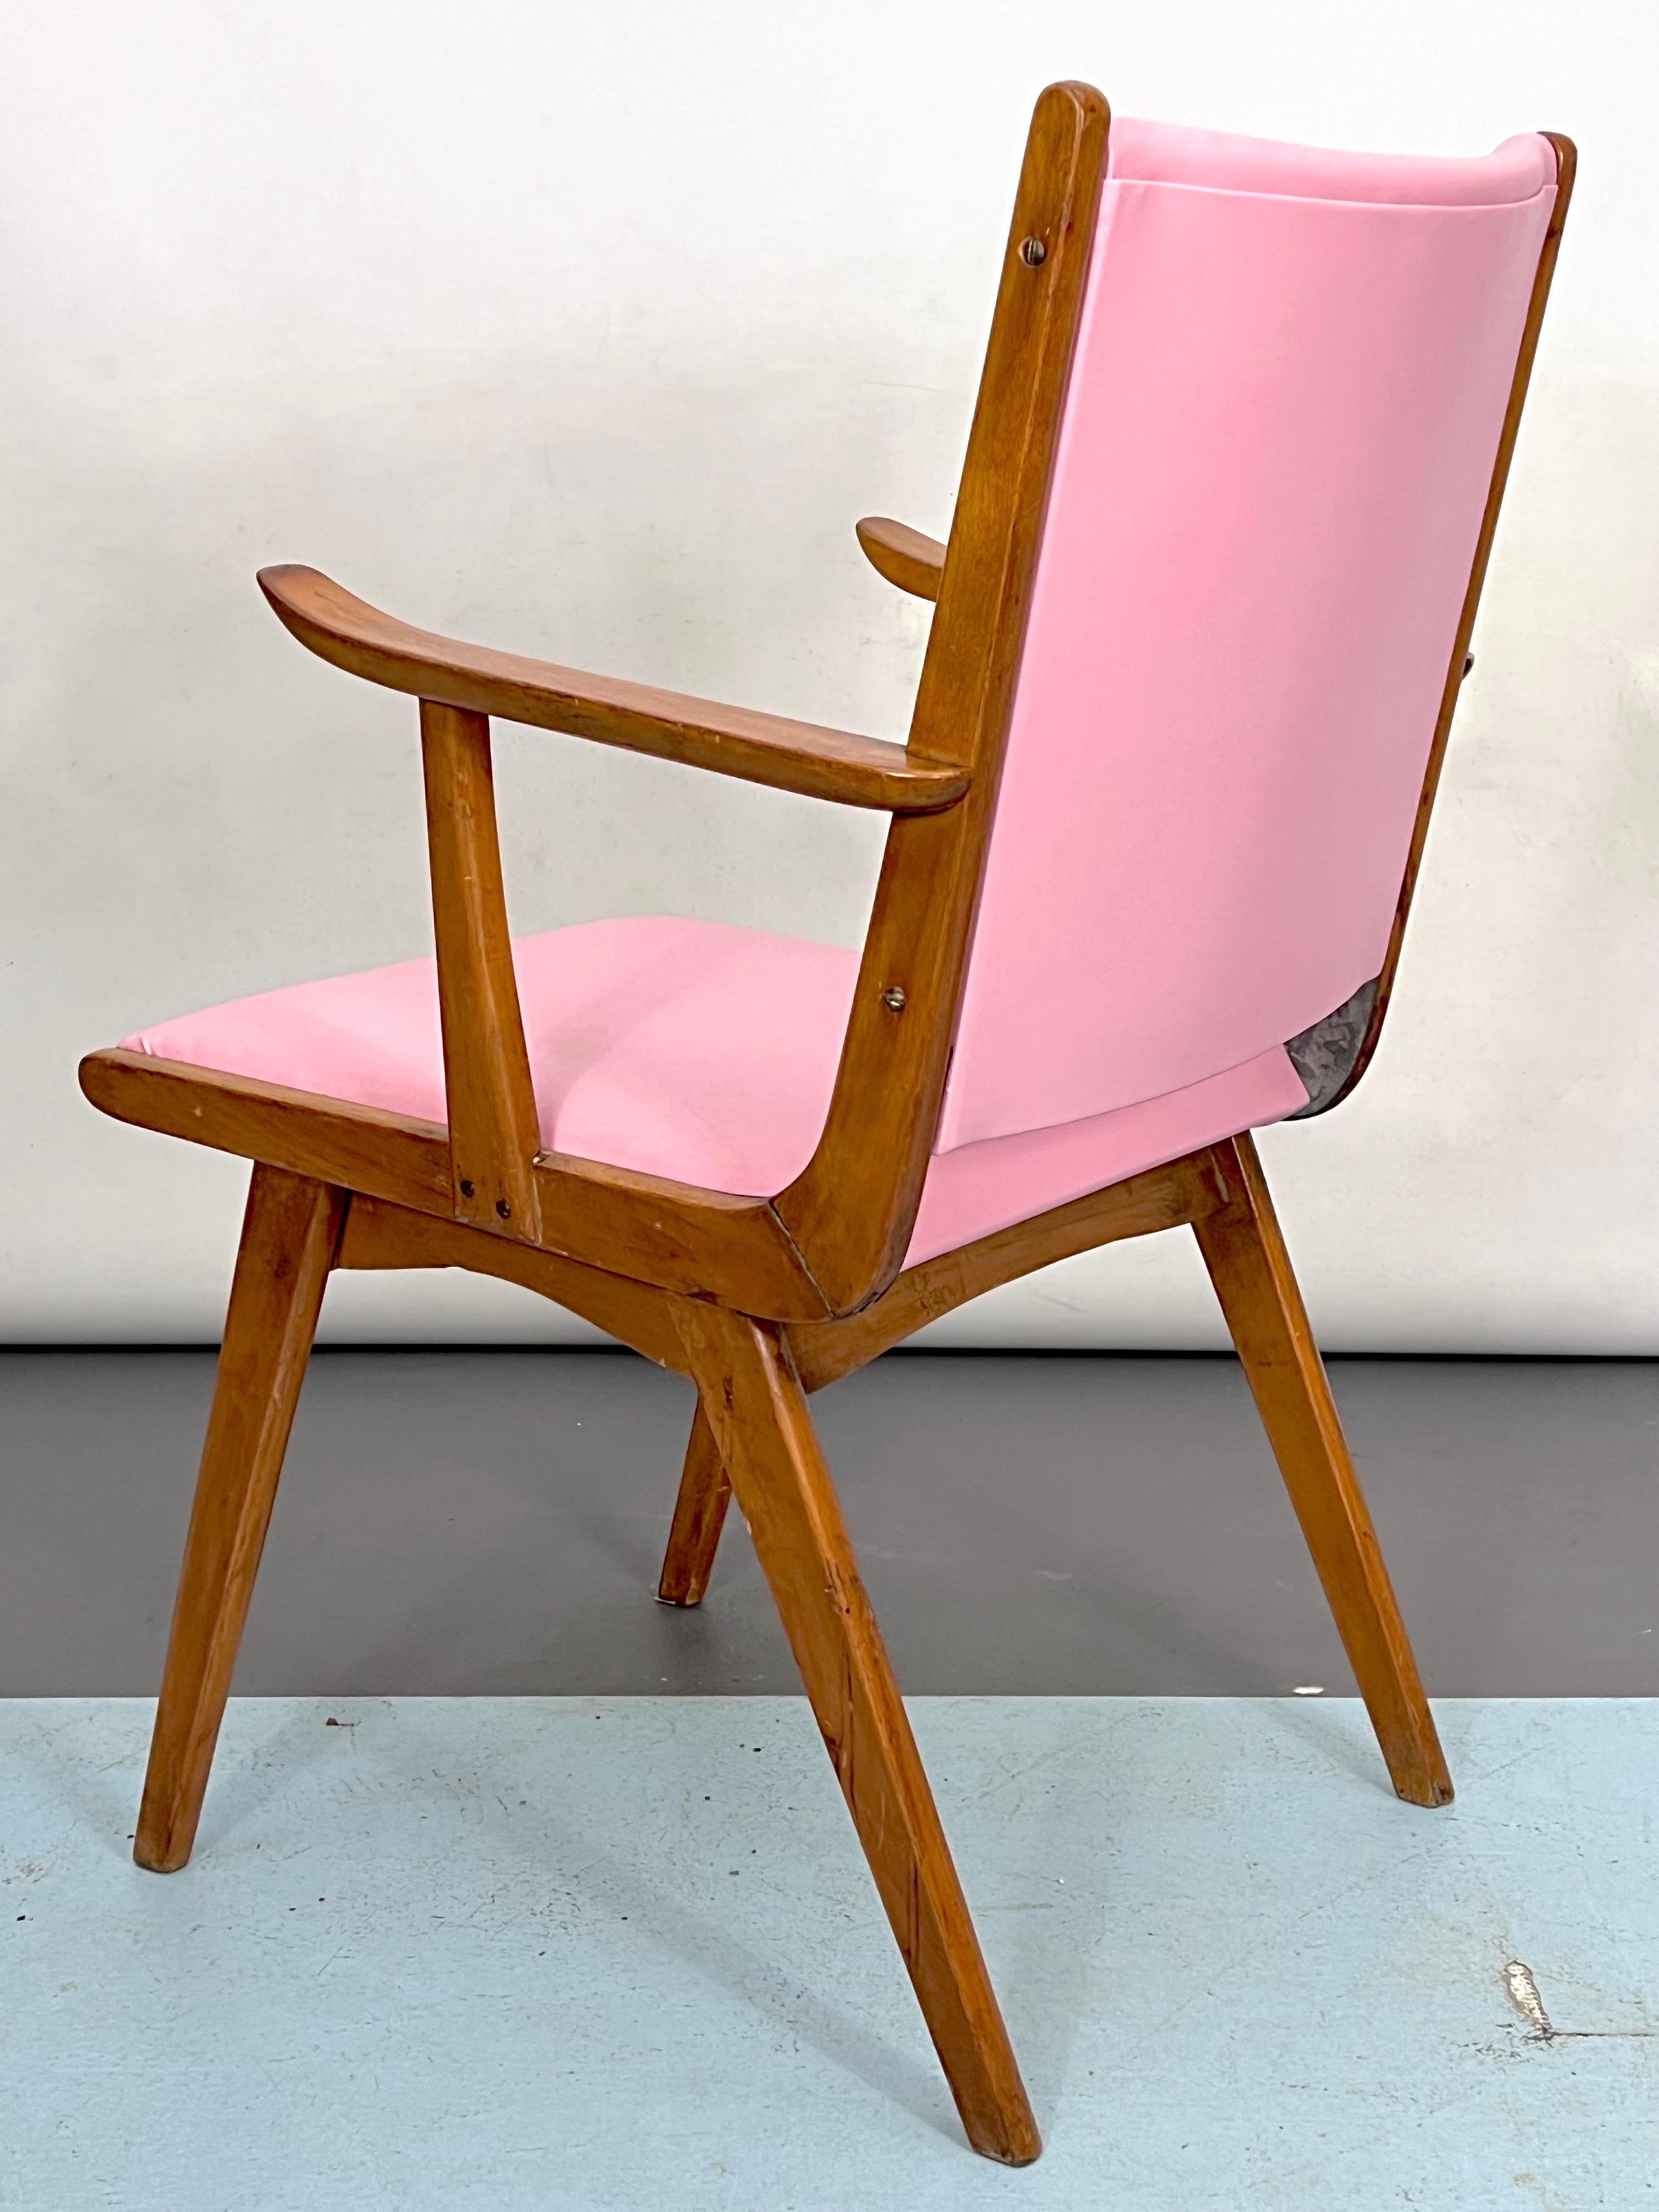 Faux Leather Vintage Italian Wood Accent Chair in Pink Leatherette, Italy, 1950s For Sale